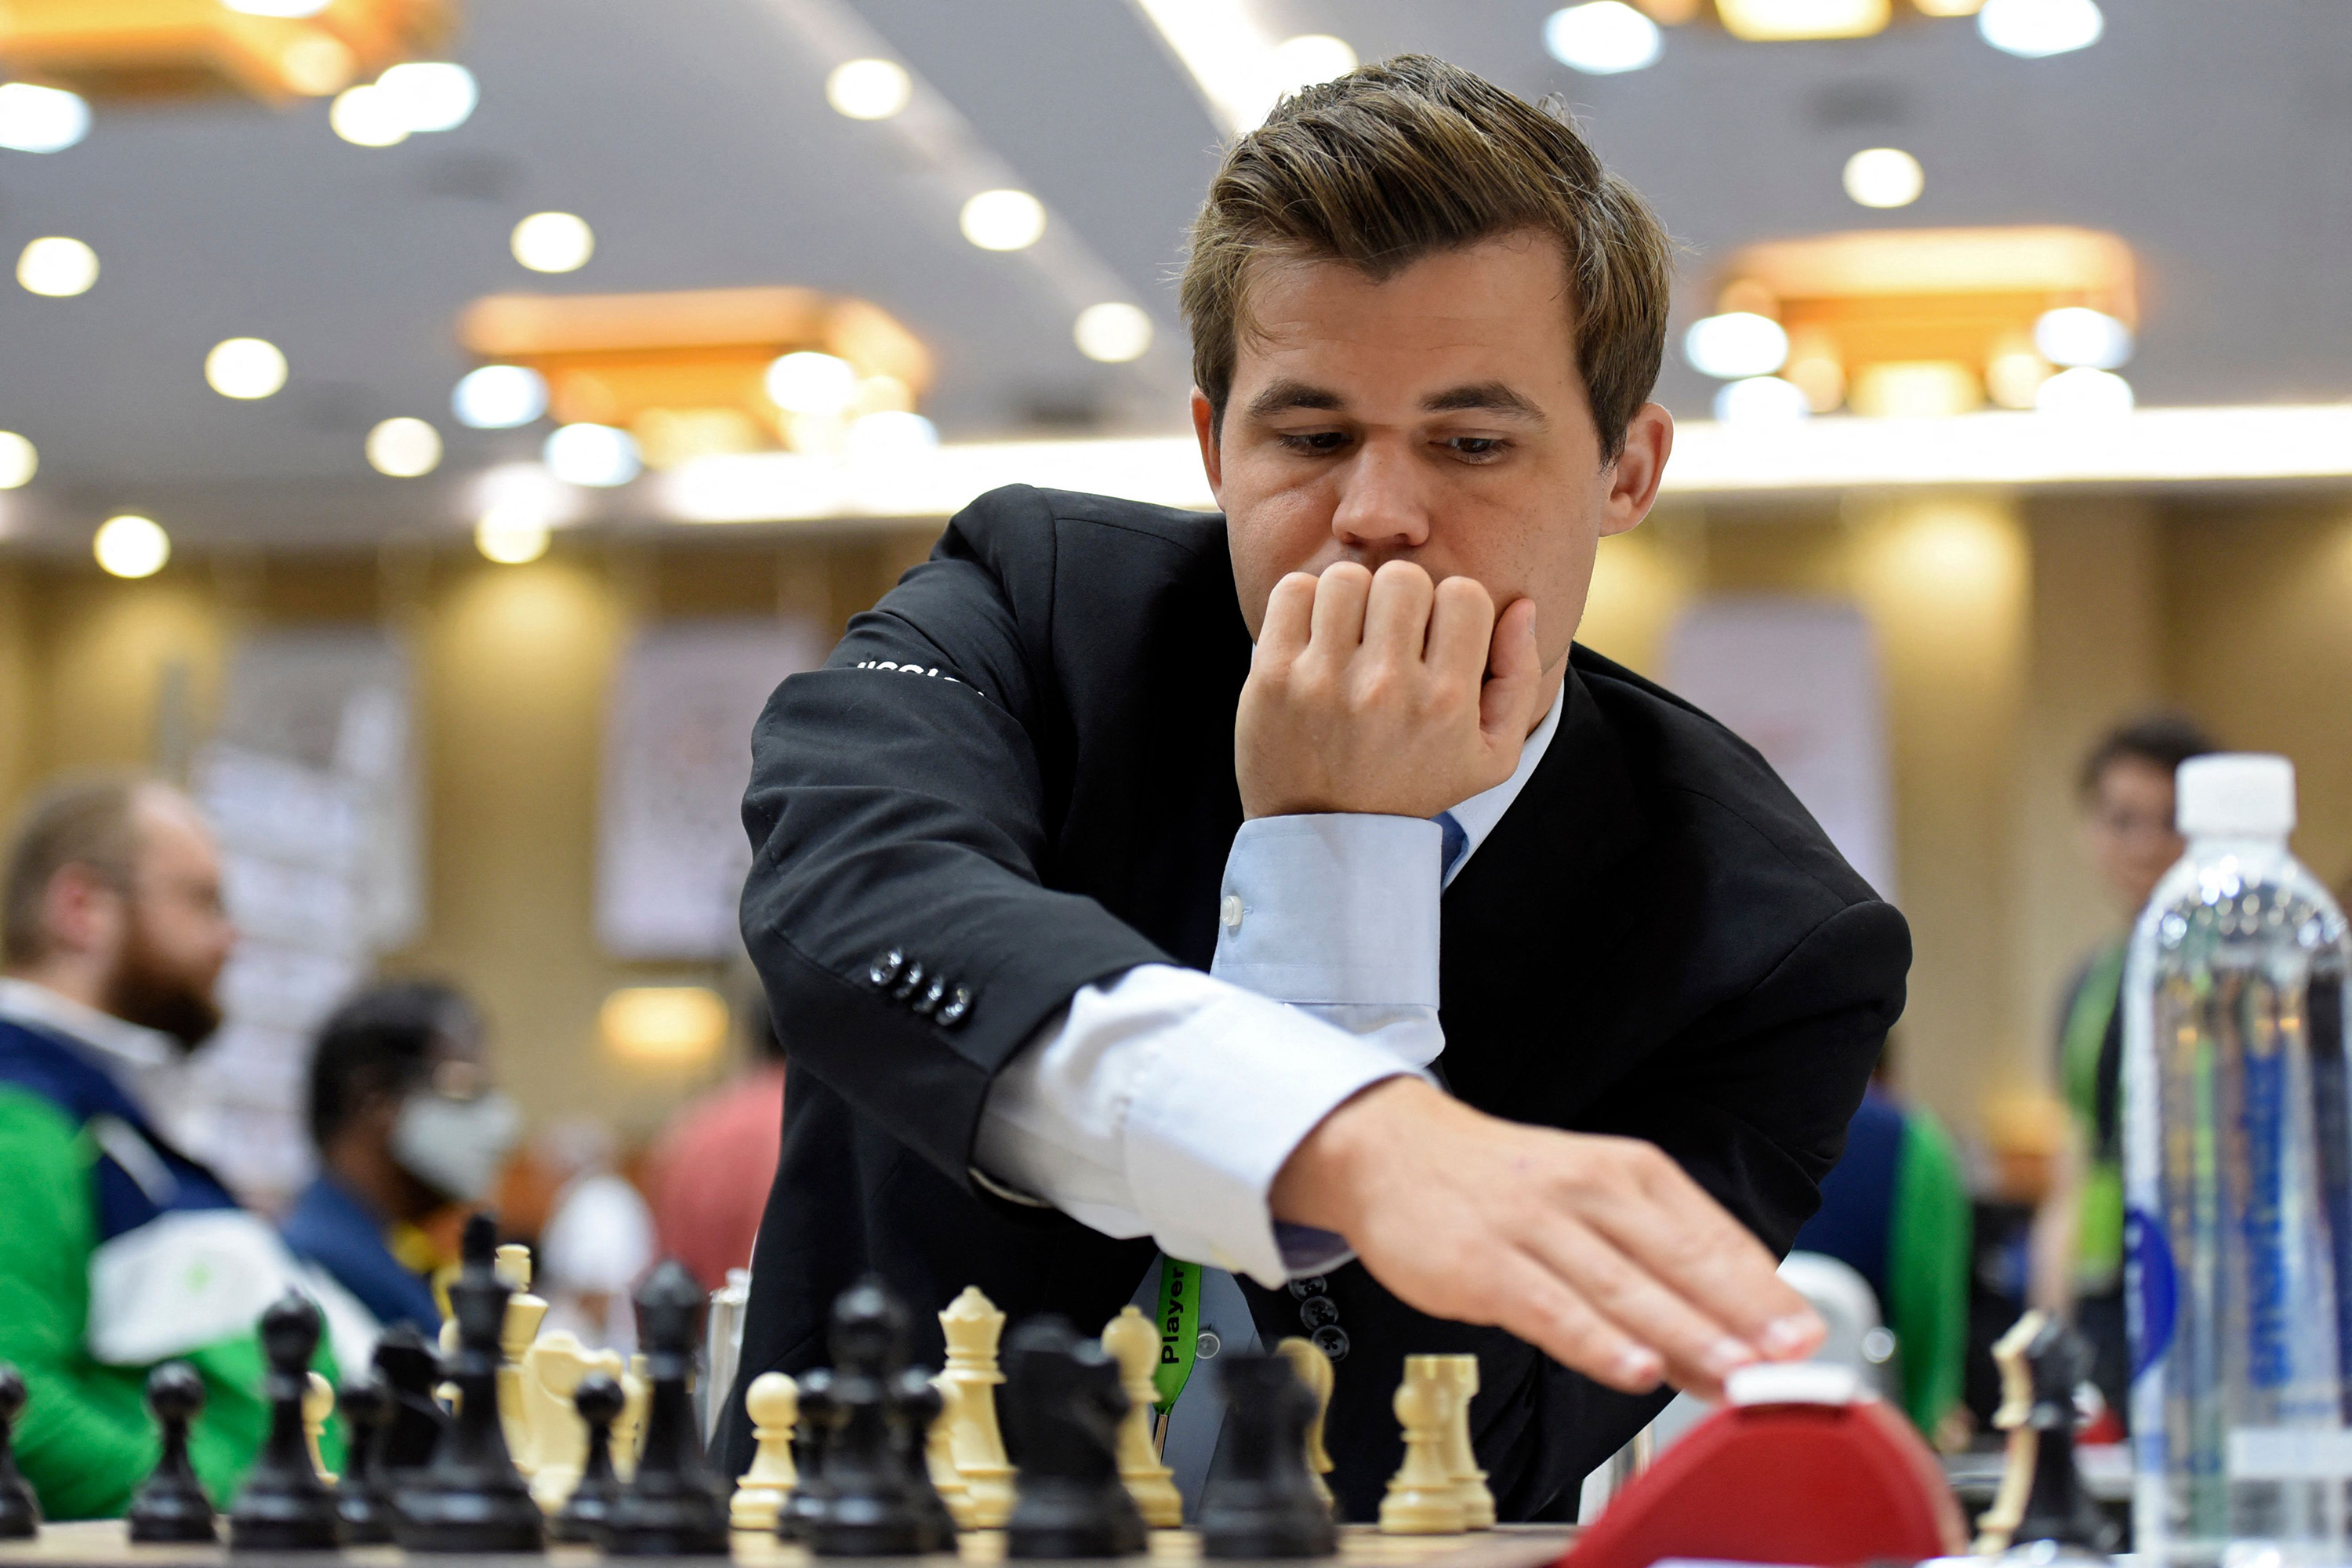 Chess Champion Magnus Carlsen Sued for 100 Million Over Cheating